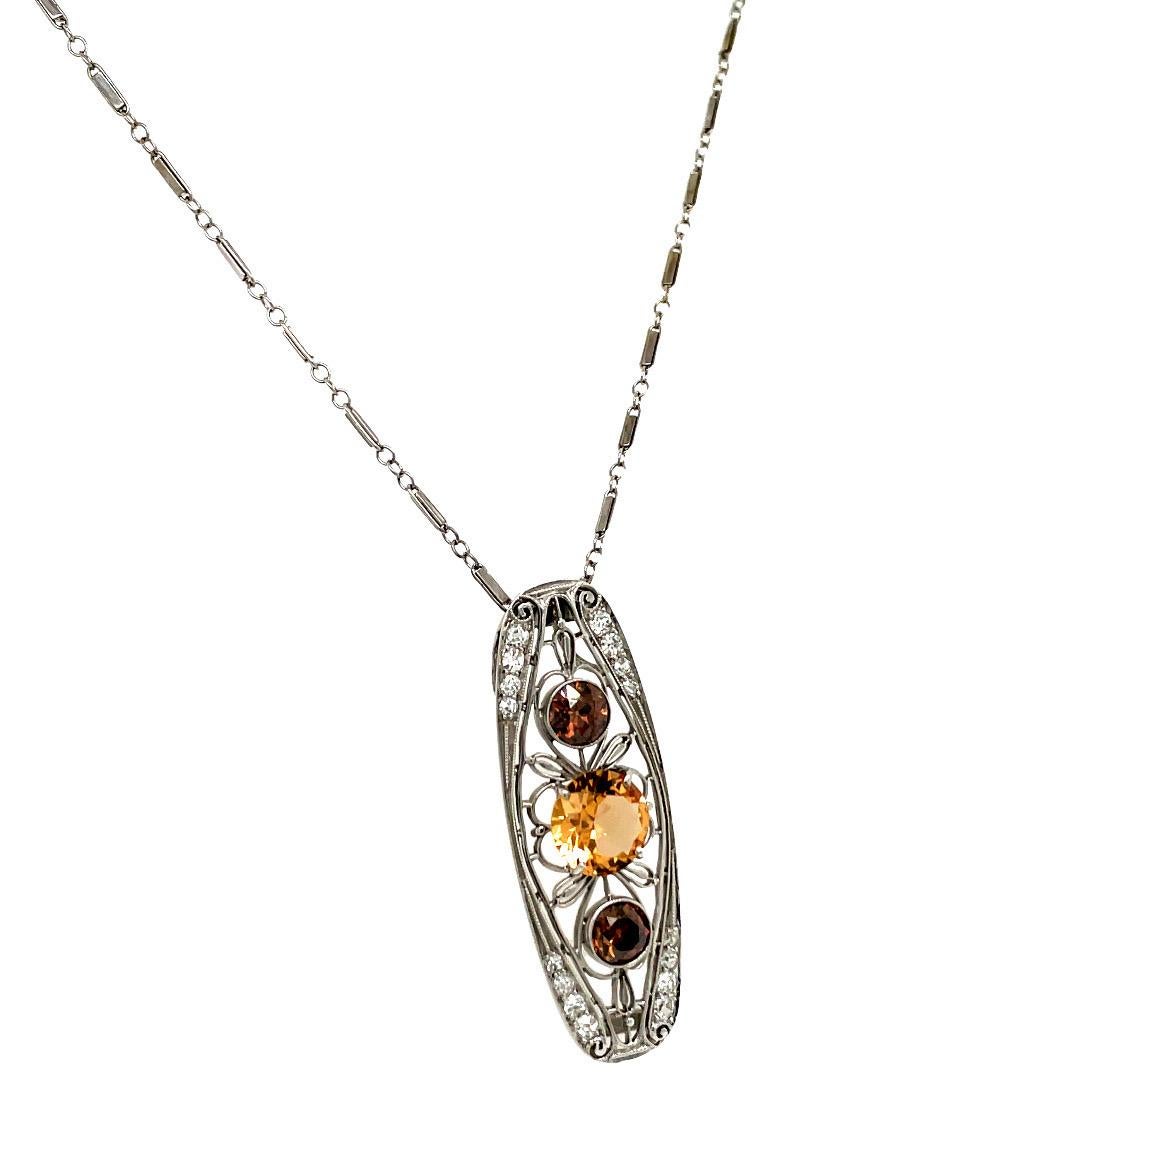 Vintage Platinum Filigree Pendant with Precious Topaz and Brown Diamonds In Excellent Condition For Sale In Boston, MA